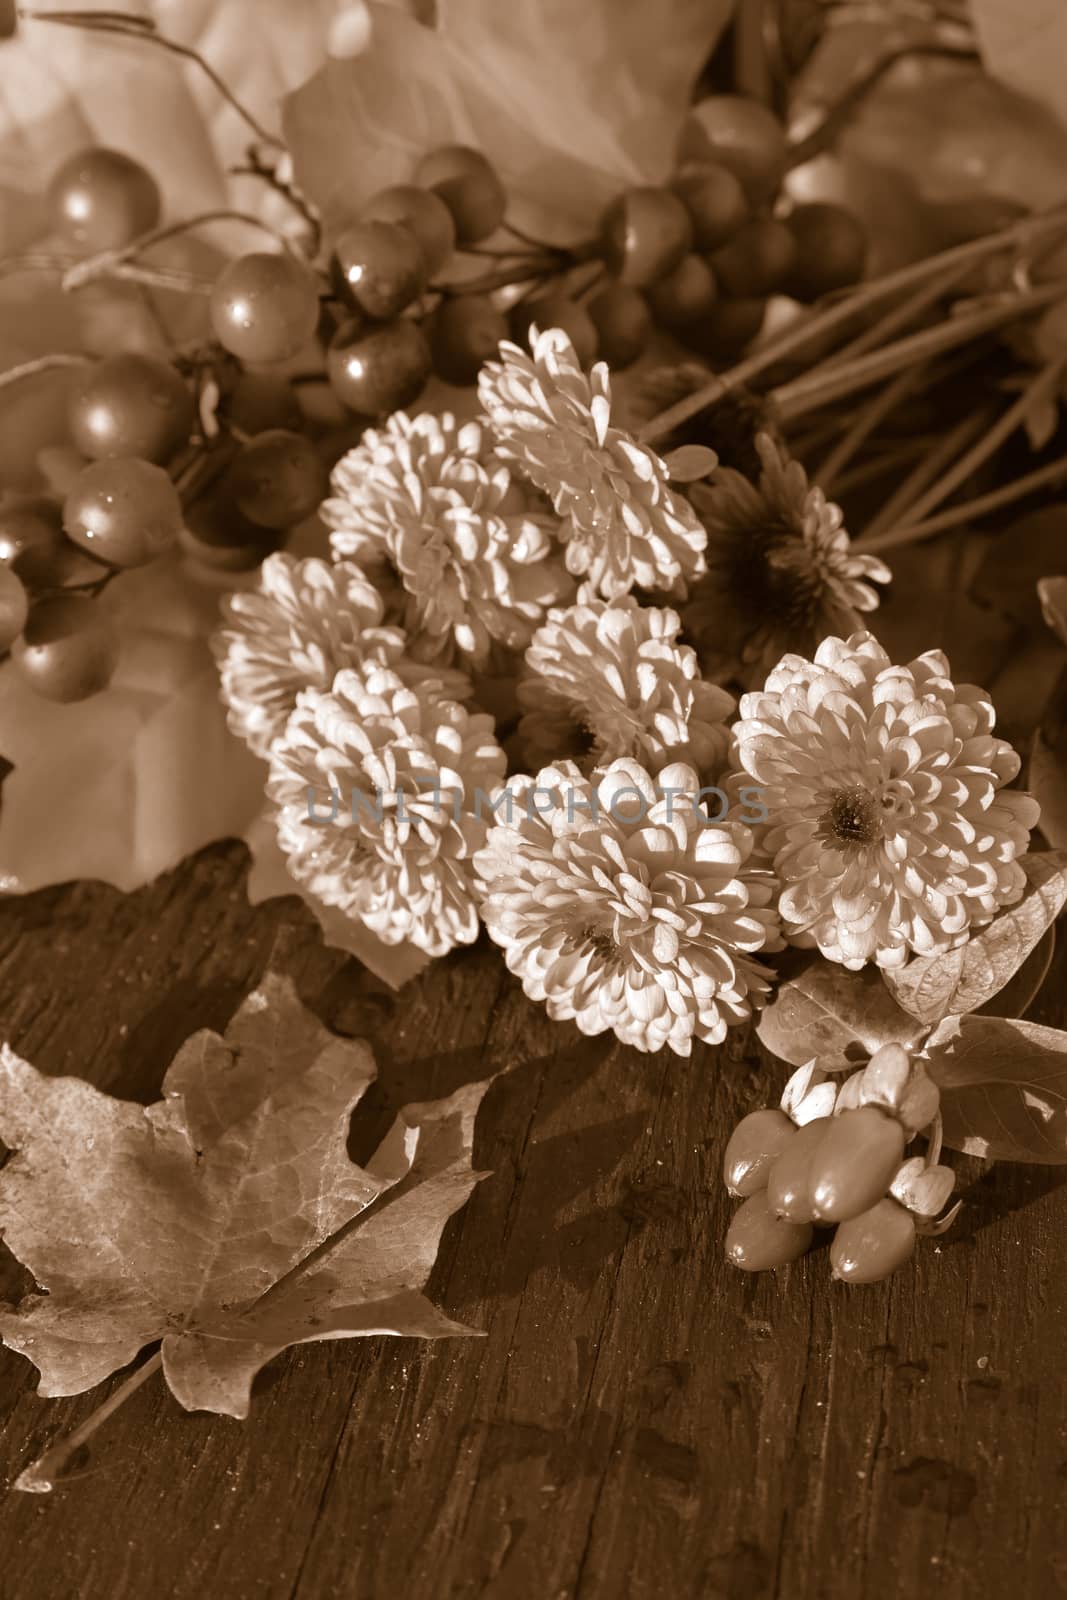 Fall or autumn flowers, and berries with sepia leaves on a wooden background